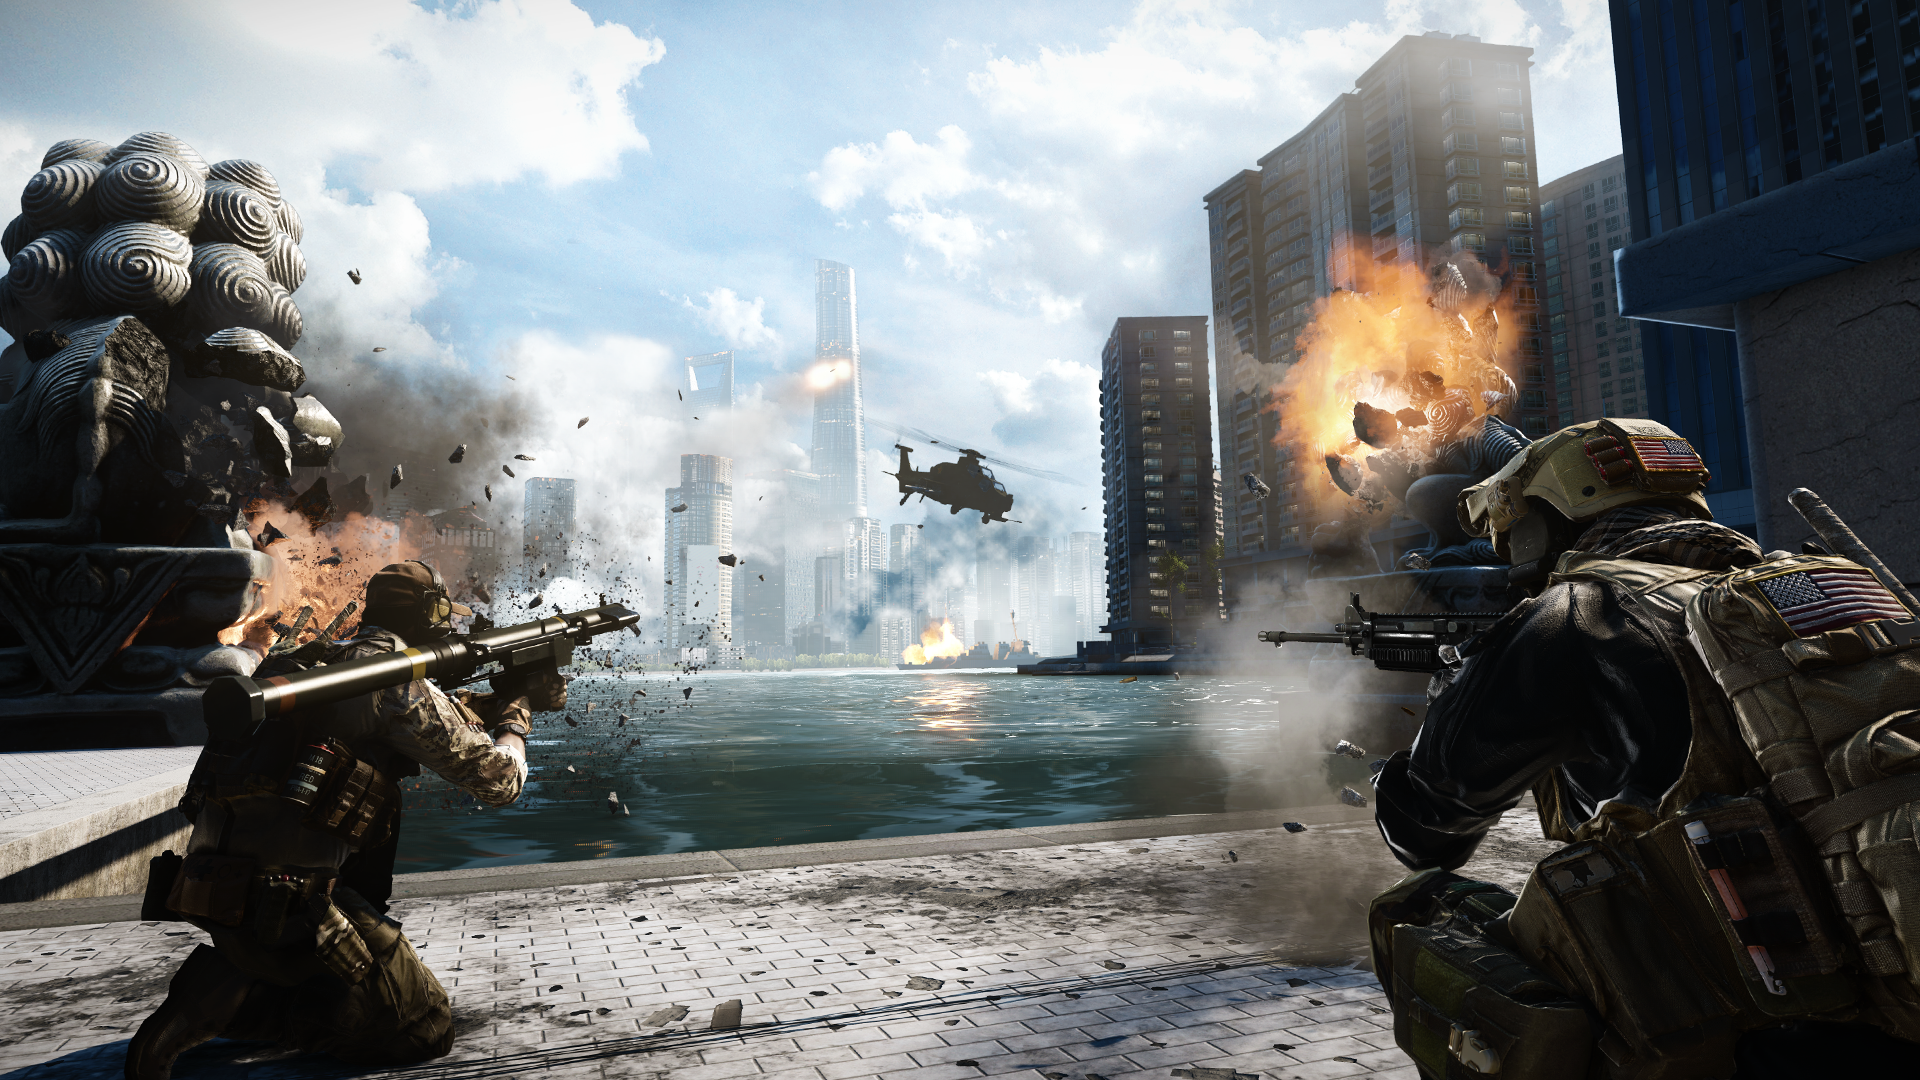 Battlefield 4 on Xbox One should finally be free of one-hit kill bug after  today's patch - GameSpot